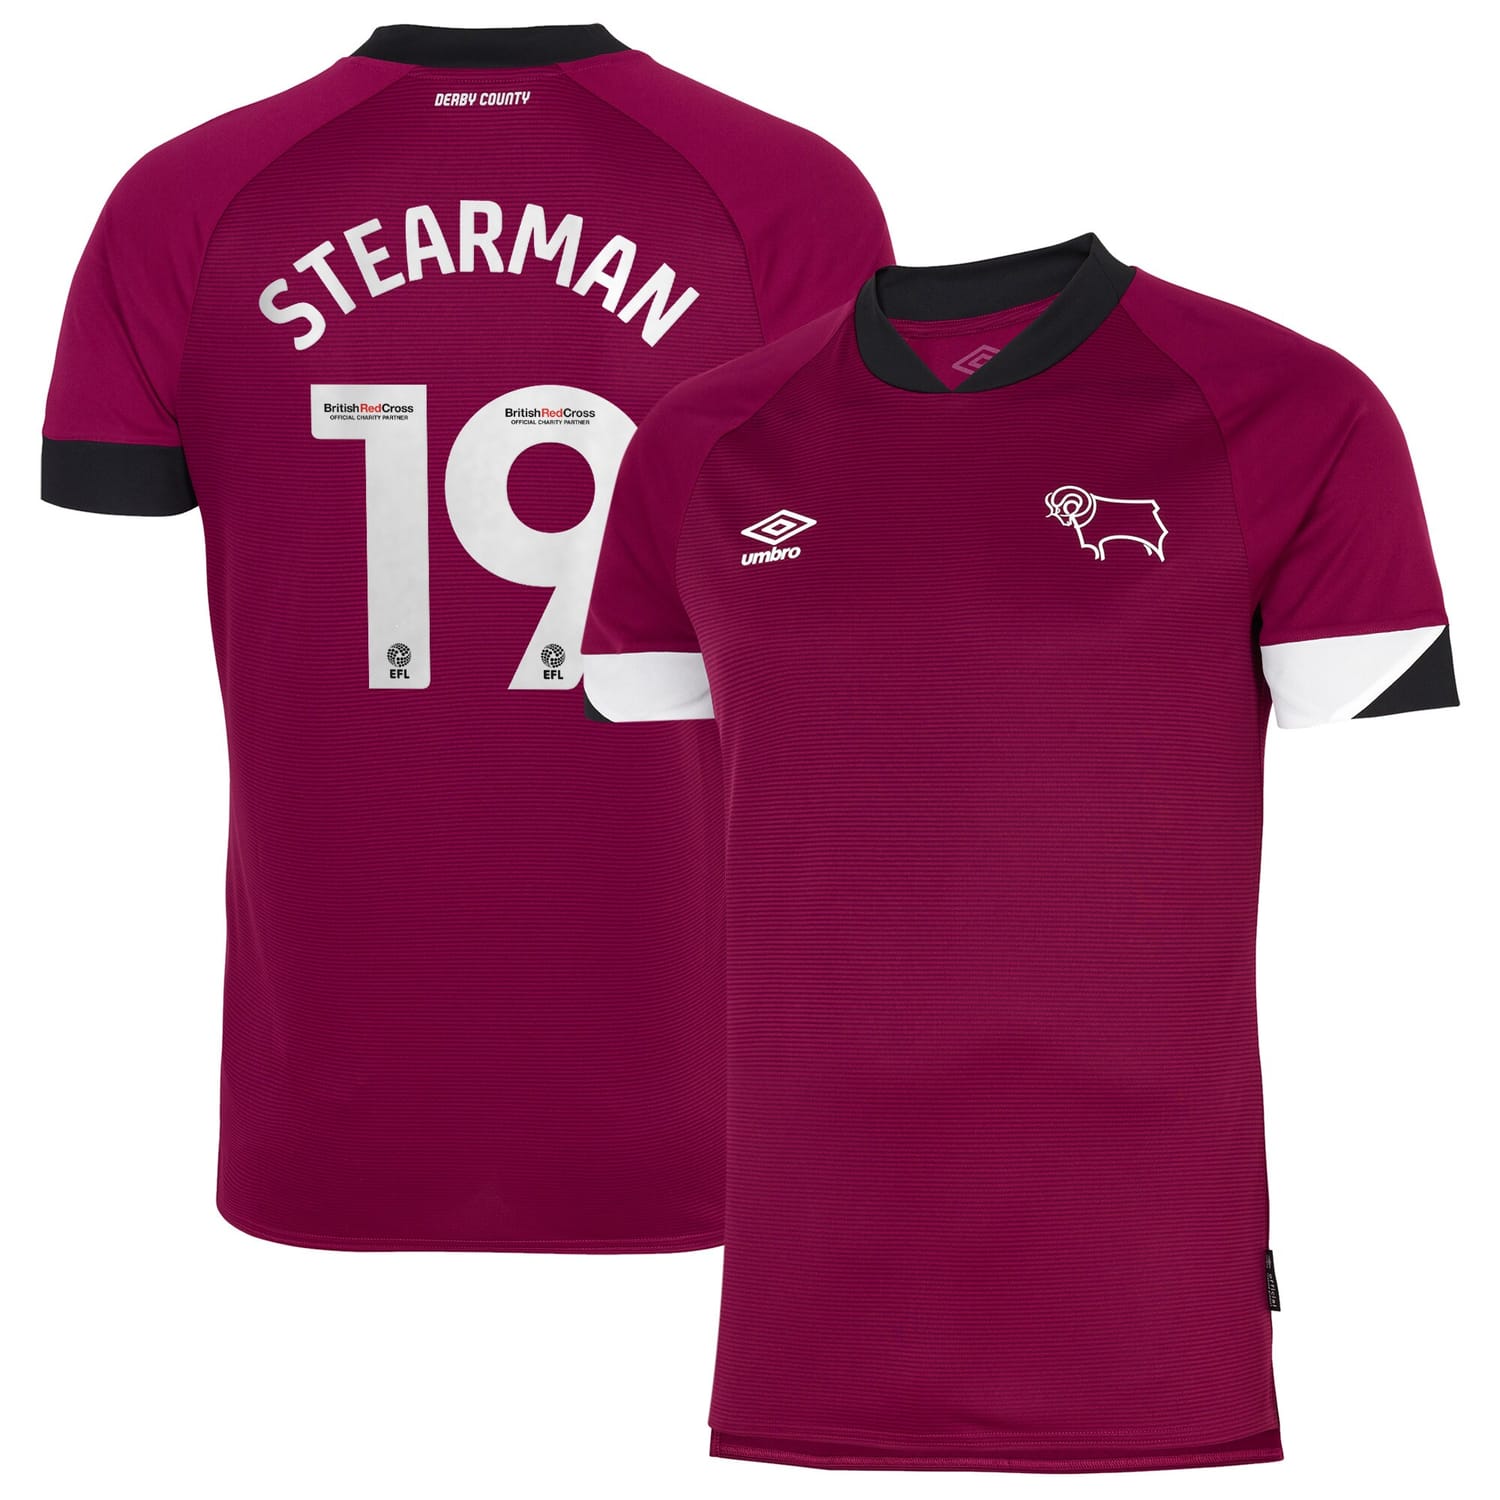 EFL League One Derby County Third Jersey Shirt 2022-23 player Stearman 19 printing for Men